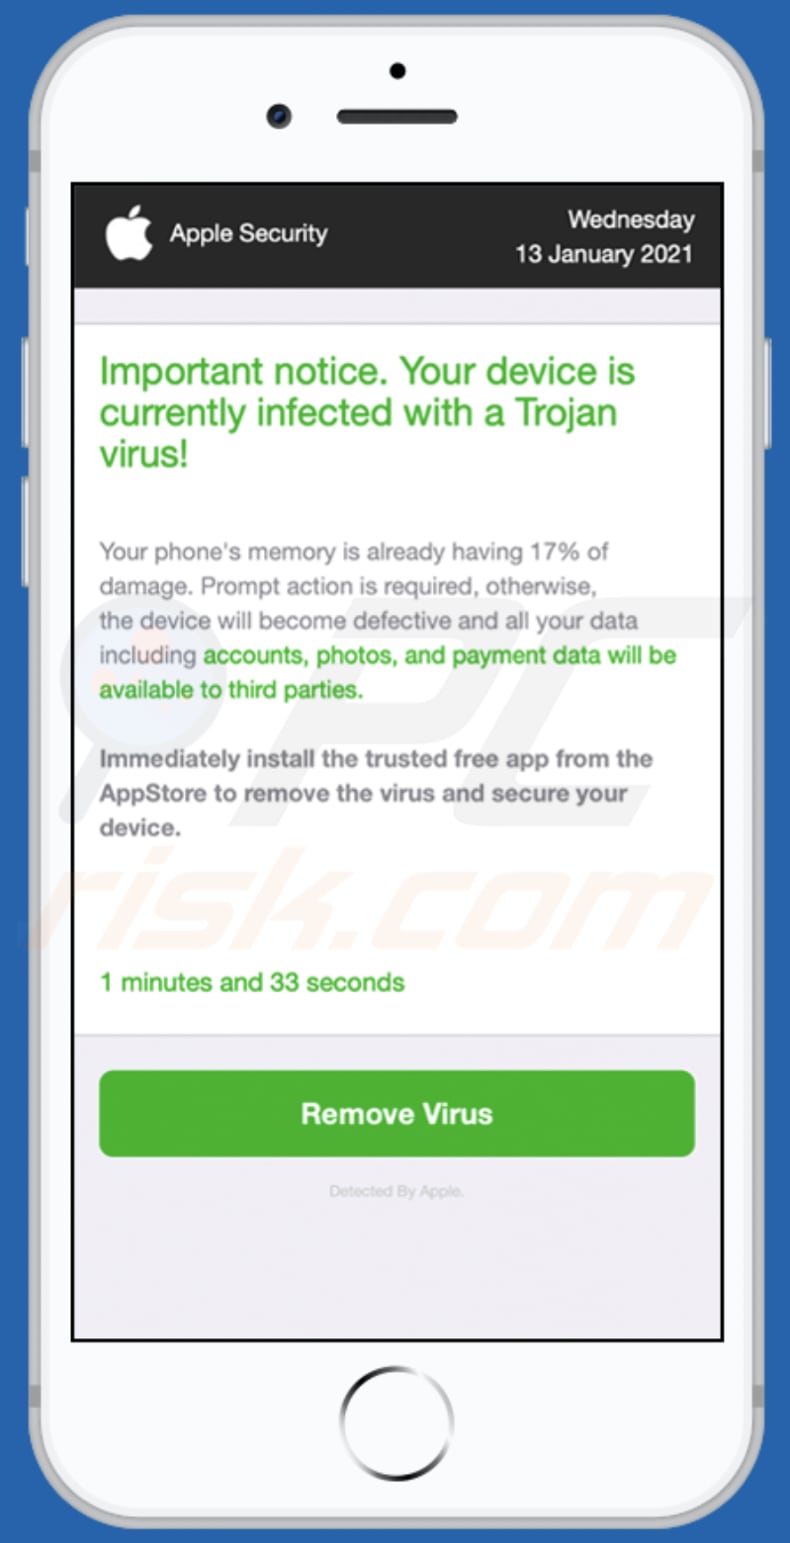 systemtechnotify.com pop-up scam fifth variant background